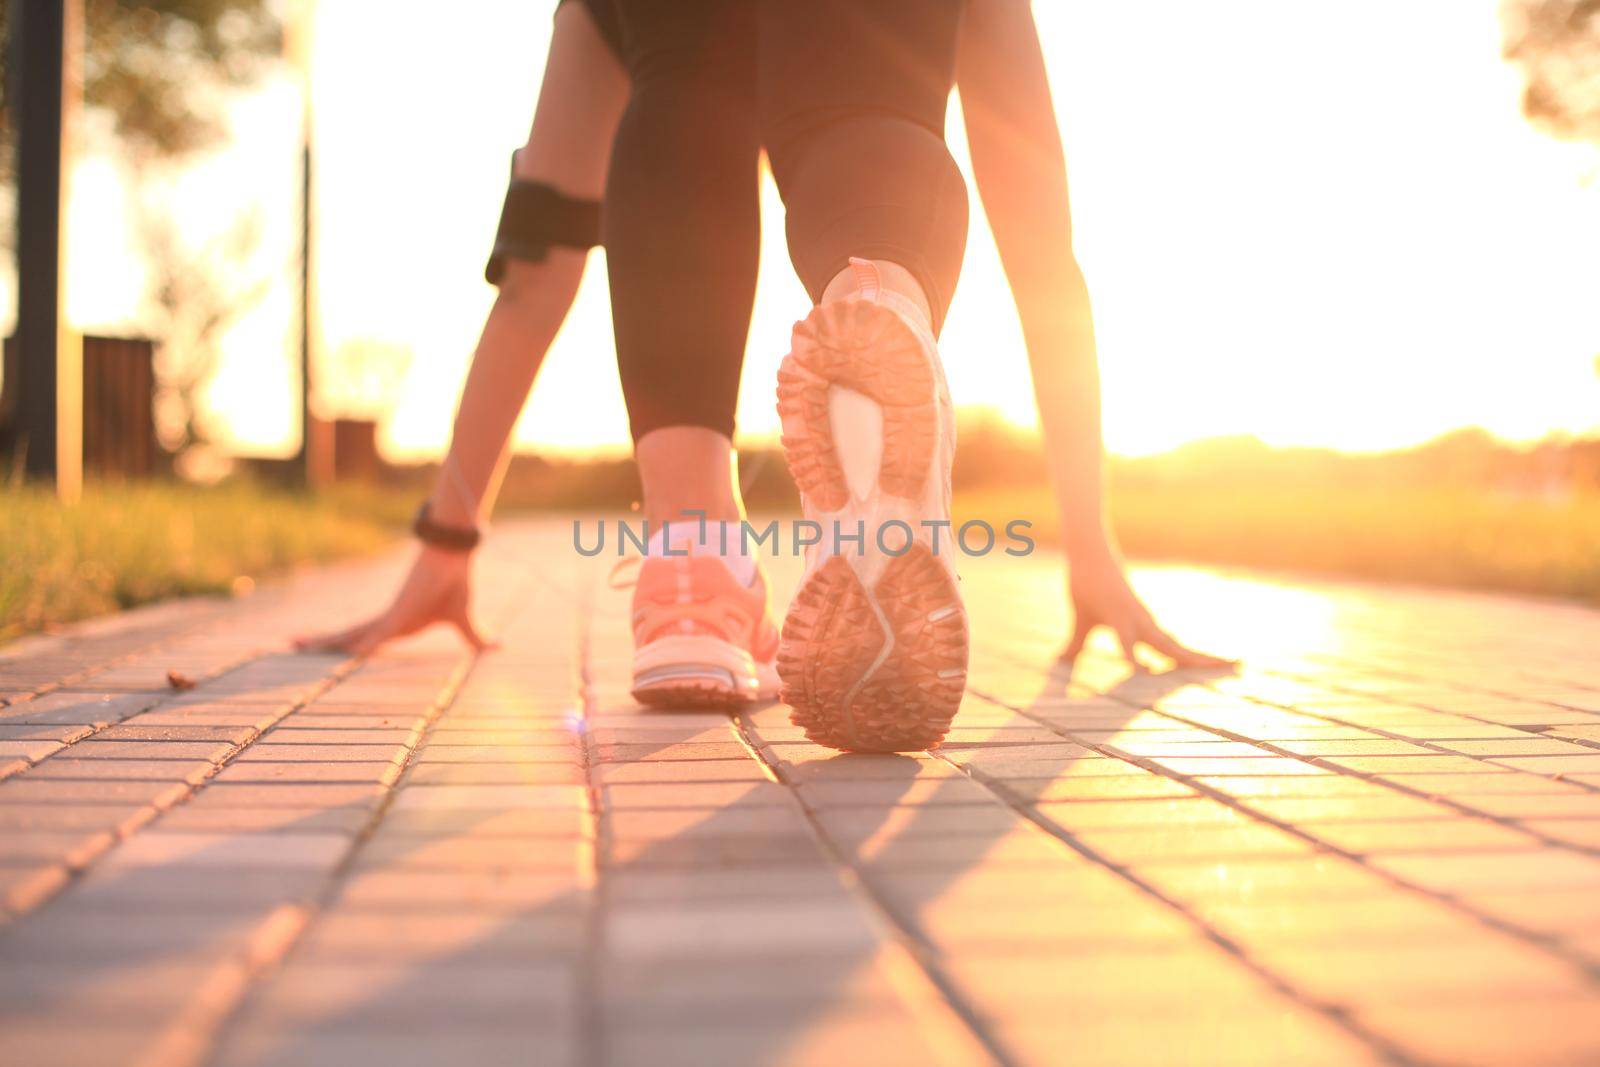 Runner feet running on road closeup on shoe, outdoor at sunset or sunrise in city by tsyhun